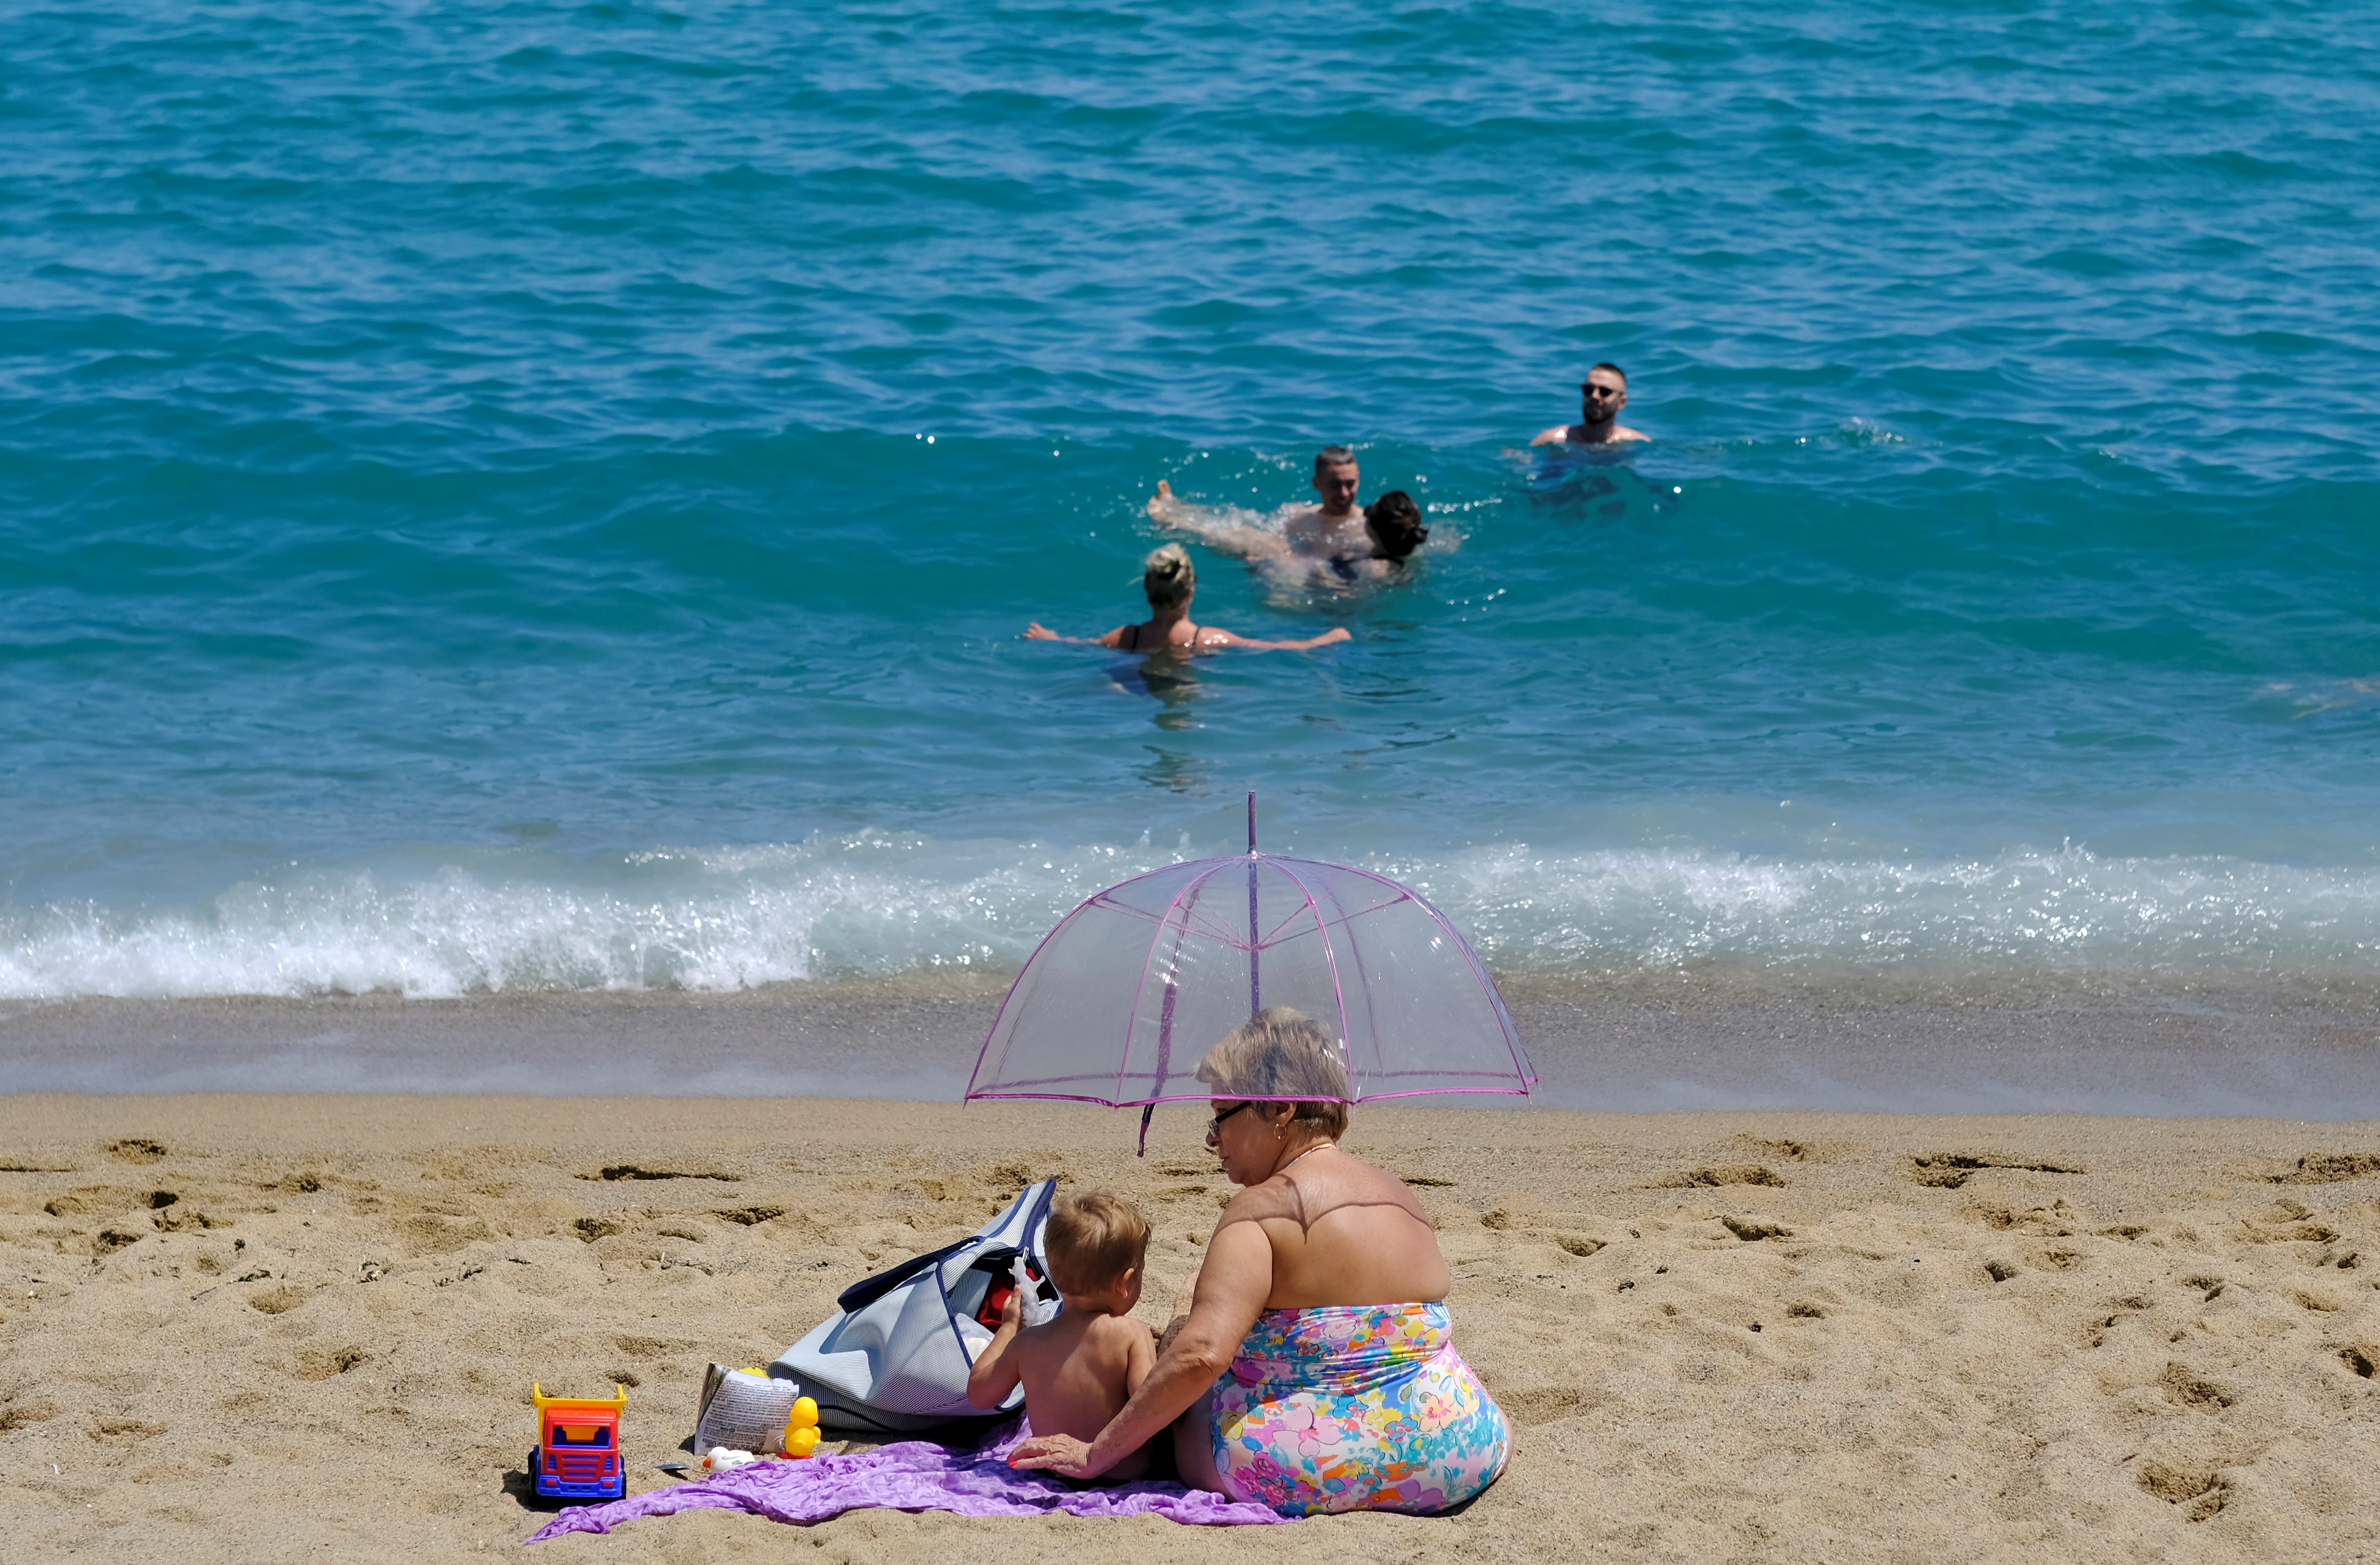 Spain's summer tourism seen hitting 65% of pre-pandemic revenues